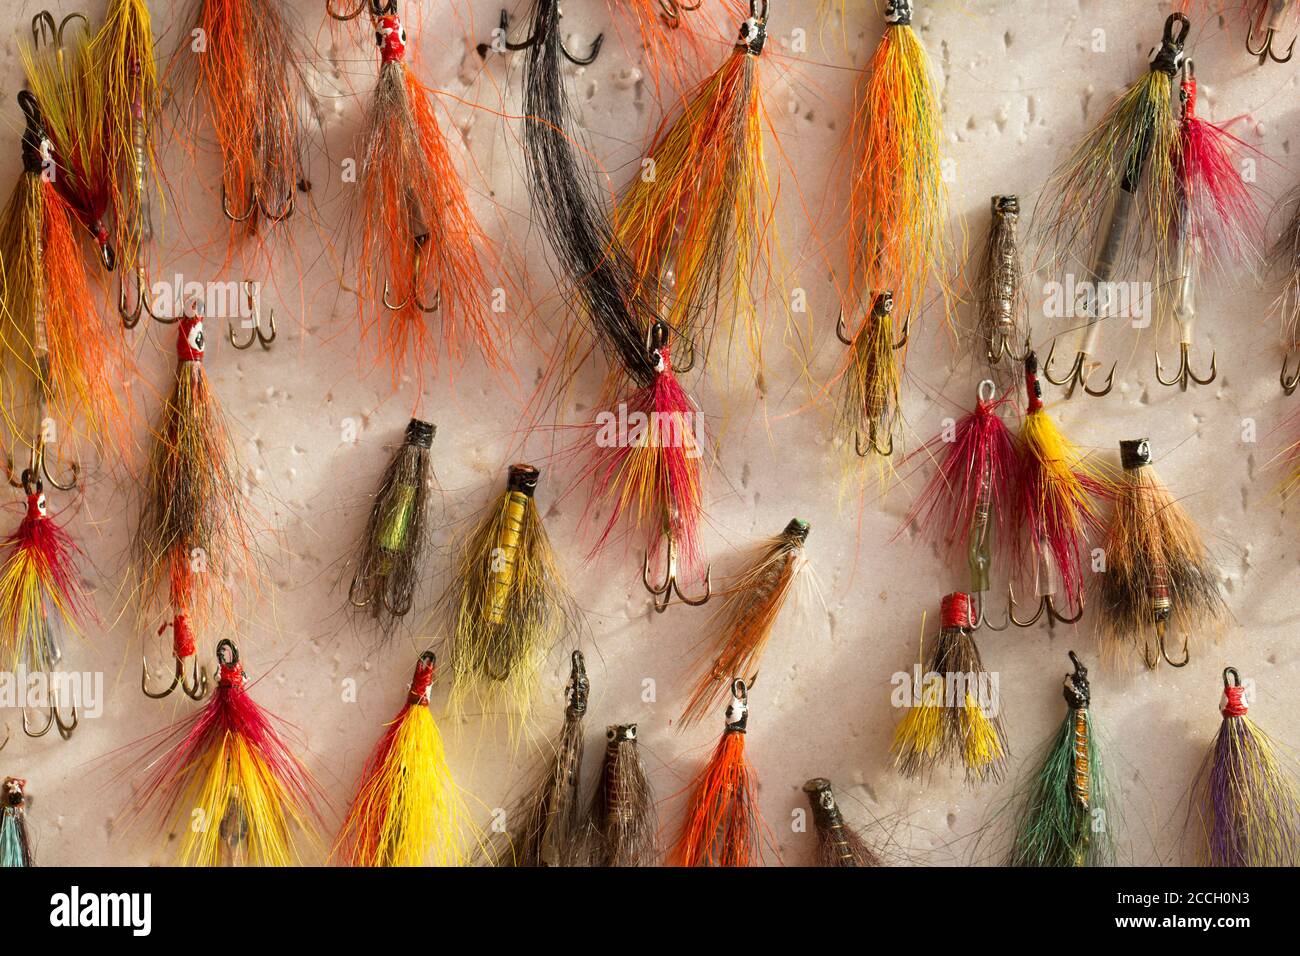 https://c8.alamy.com/comp/2CCH0N3/salmon-fishing-flies-in-a-fly-box-or-reservoir-many-of-which-appear-to-have-been-homemade-from-a-collection-of-fishing-tackle-dorset-england-uk-gb-2CCH0N3.jpg